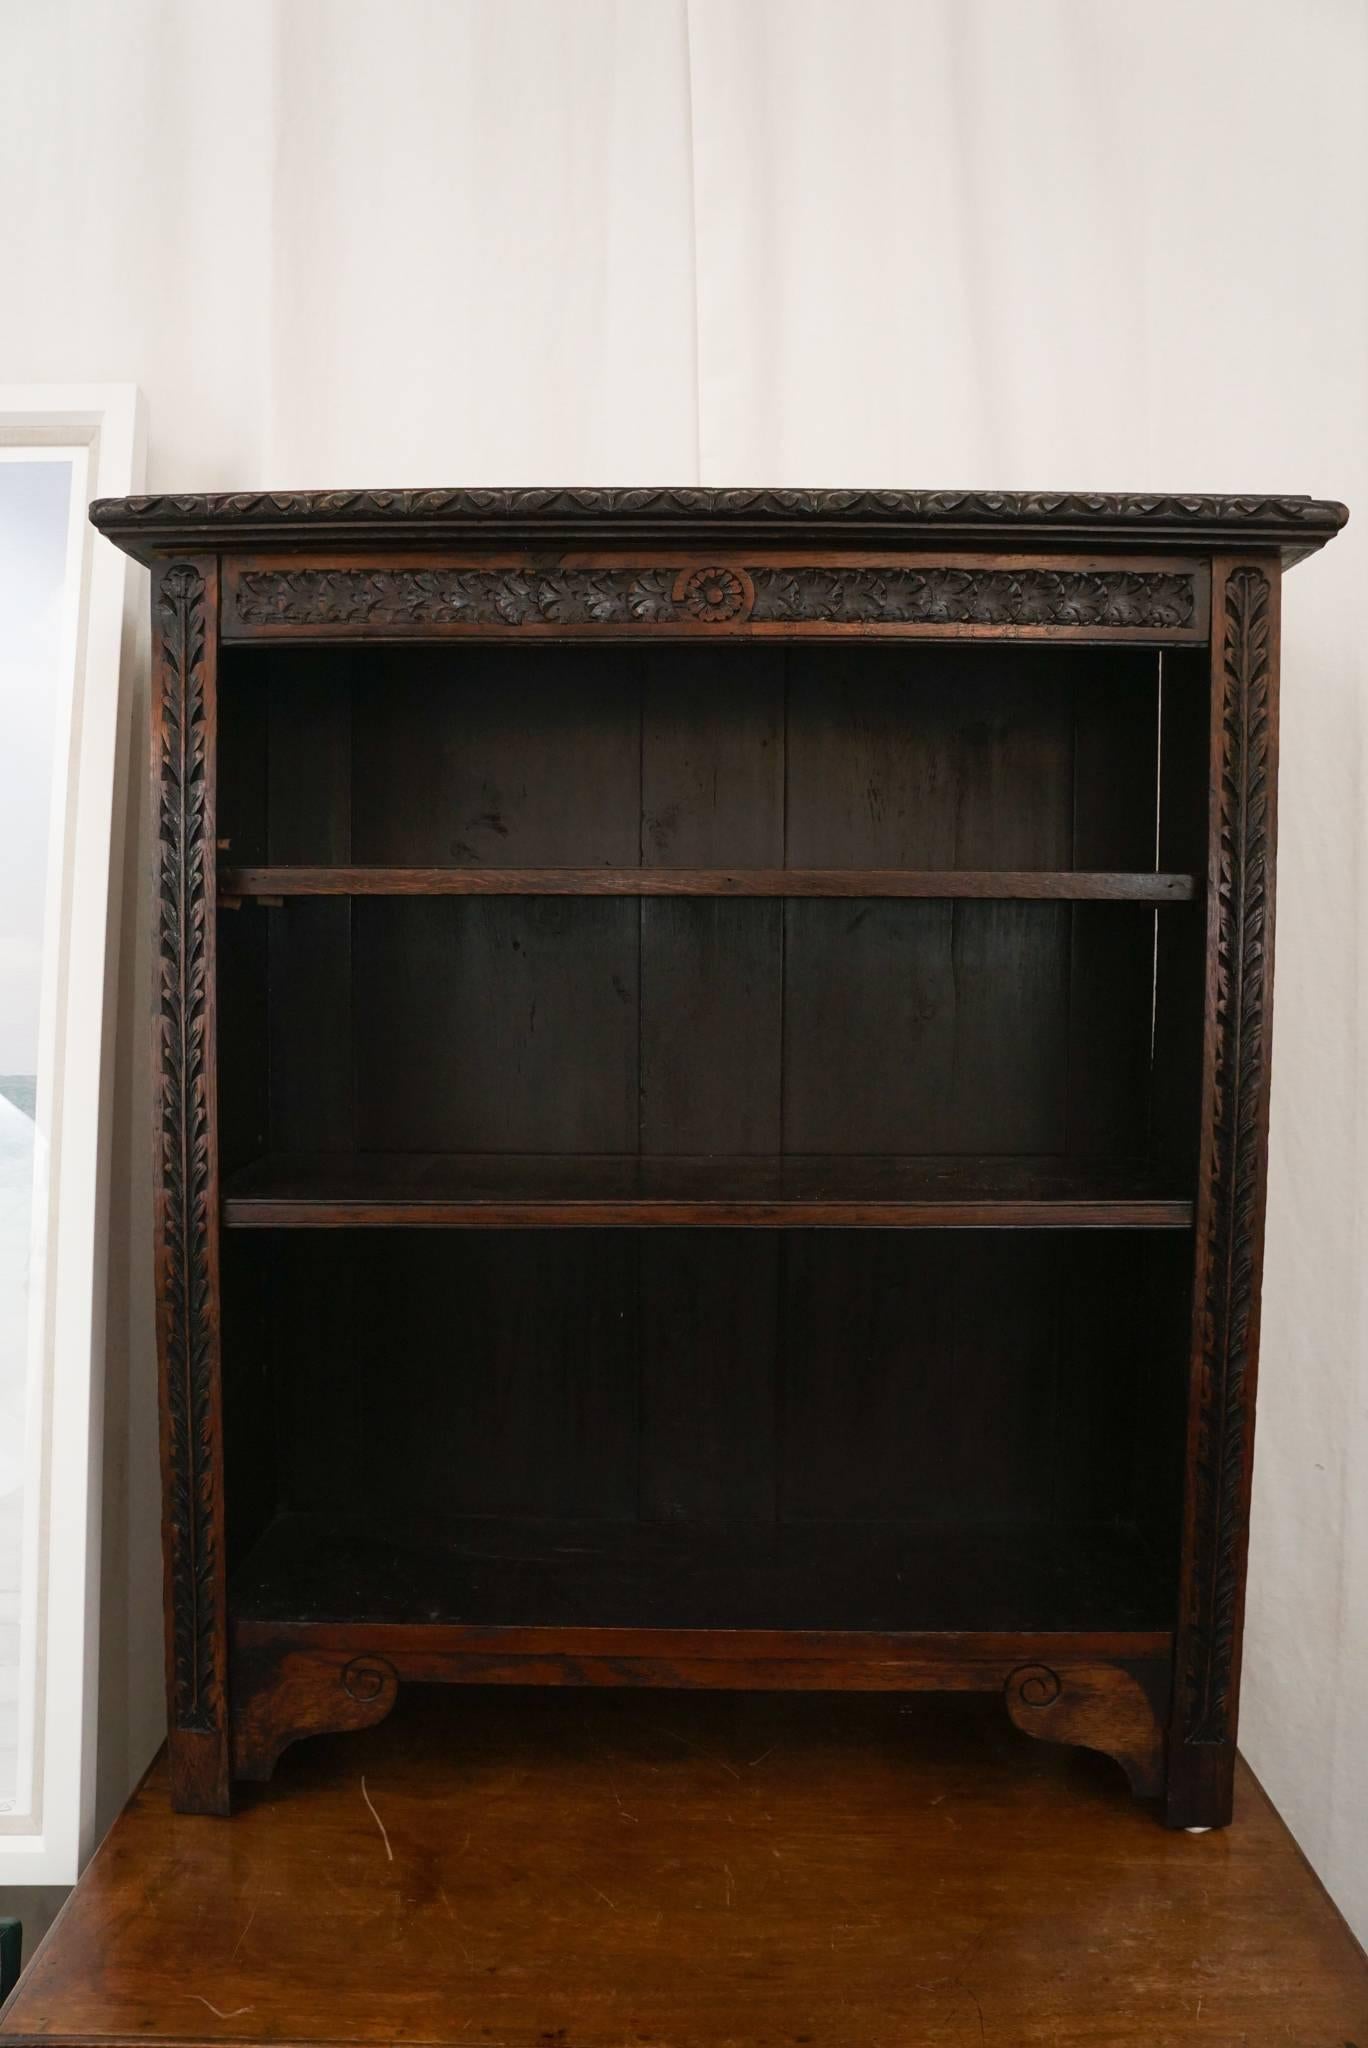 A wonderful pair of English, oak carved bookcases with three shelves.
One stationary shelf, two adjustable.